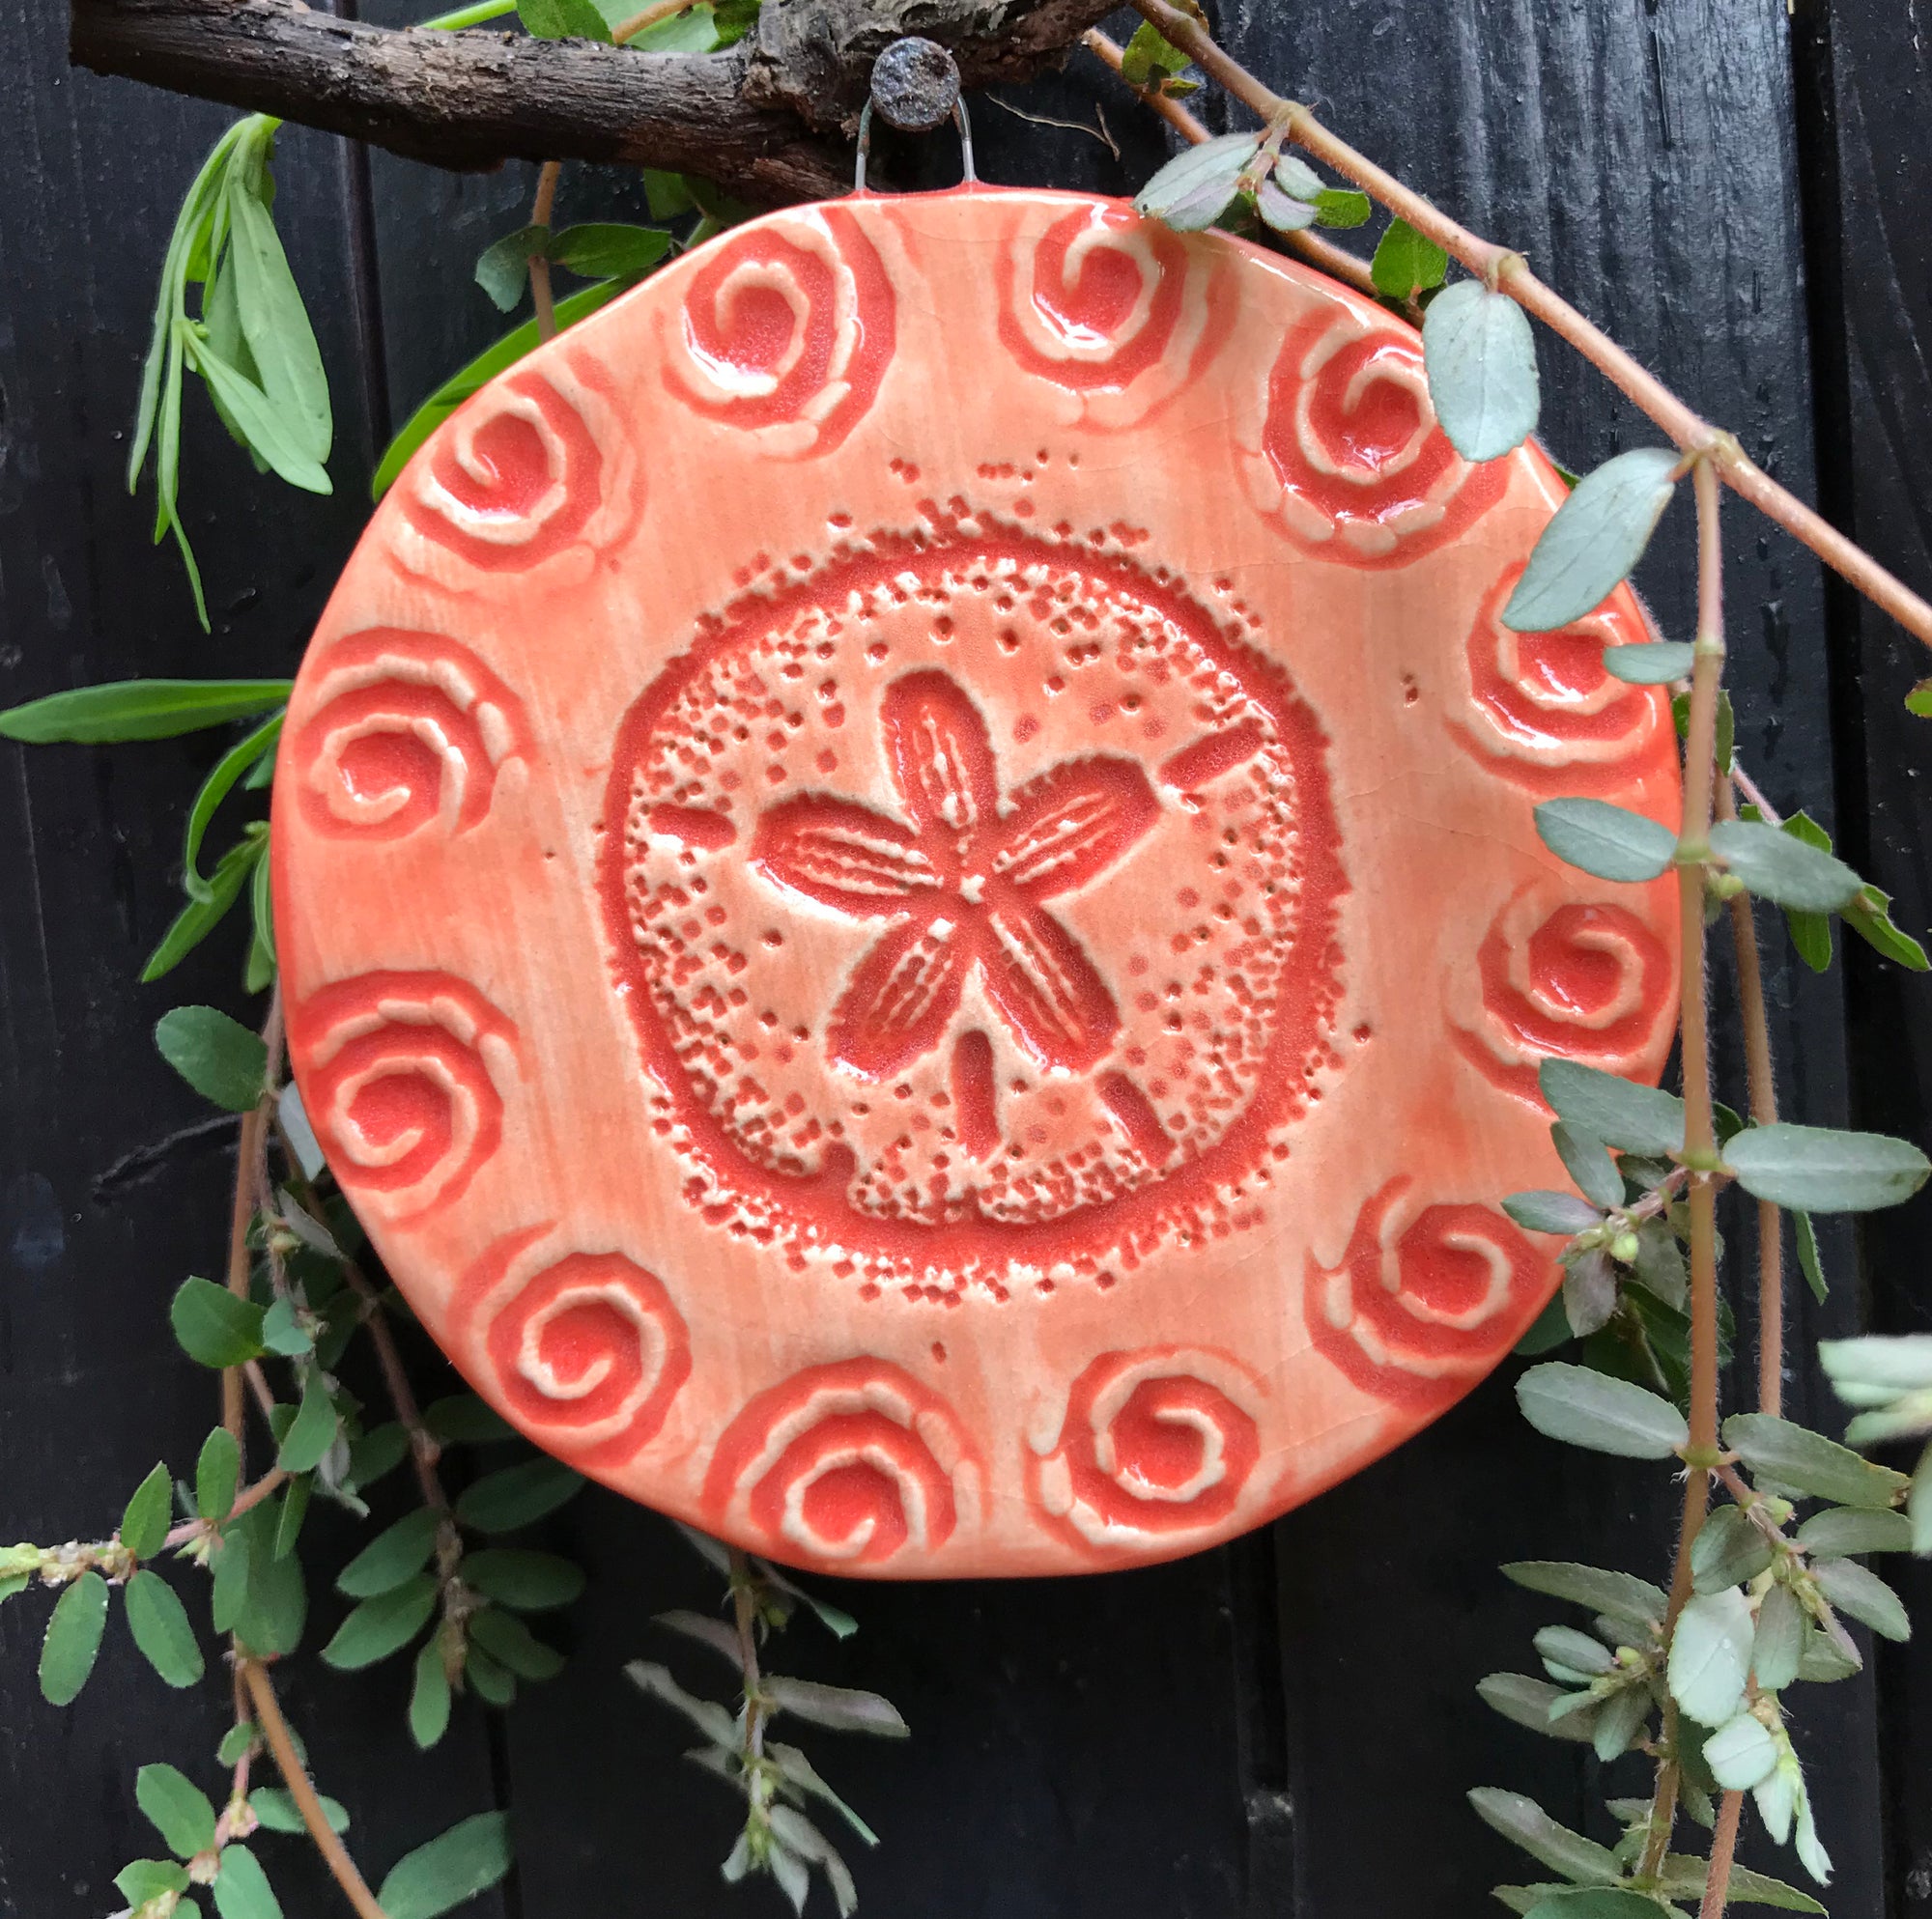 Sand Dollar Ornament in beautiful coral glaze.  A thoughtful gift for beach lovers and nature lovers.